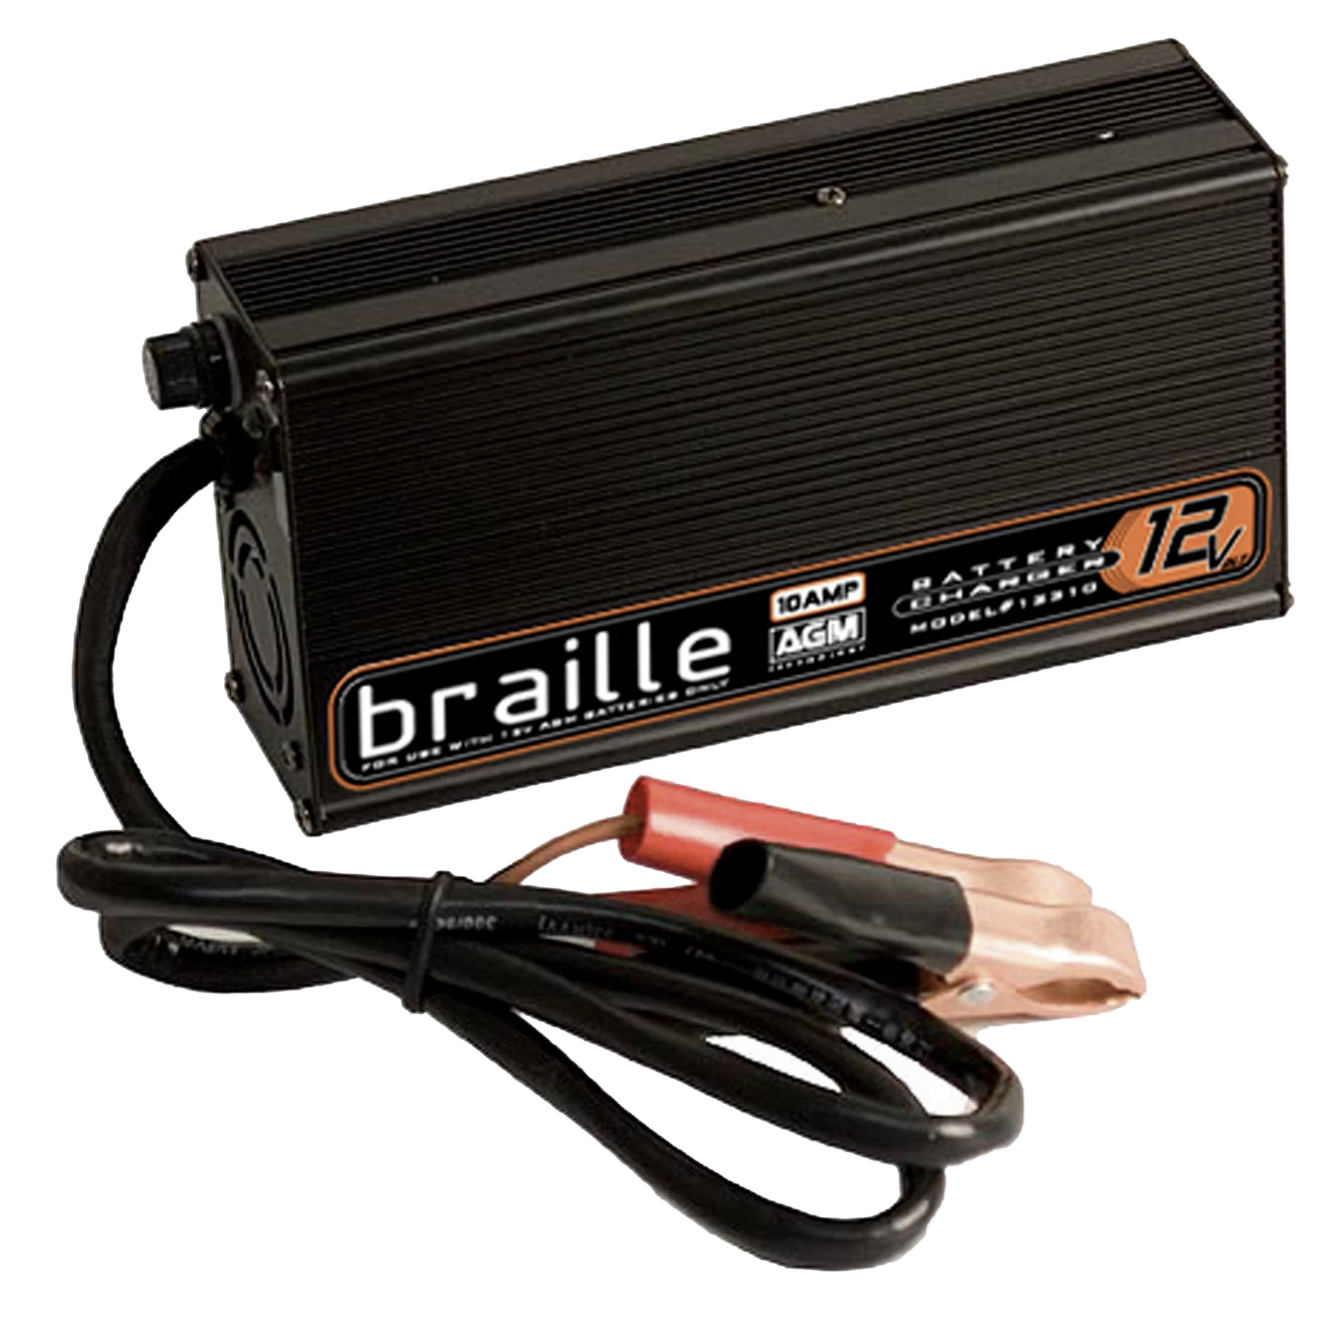 Braille 12310 12v 10A AGM Battery Charger